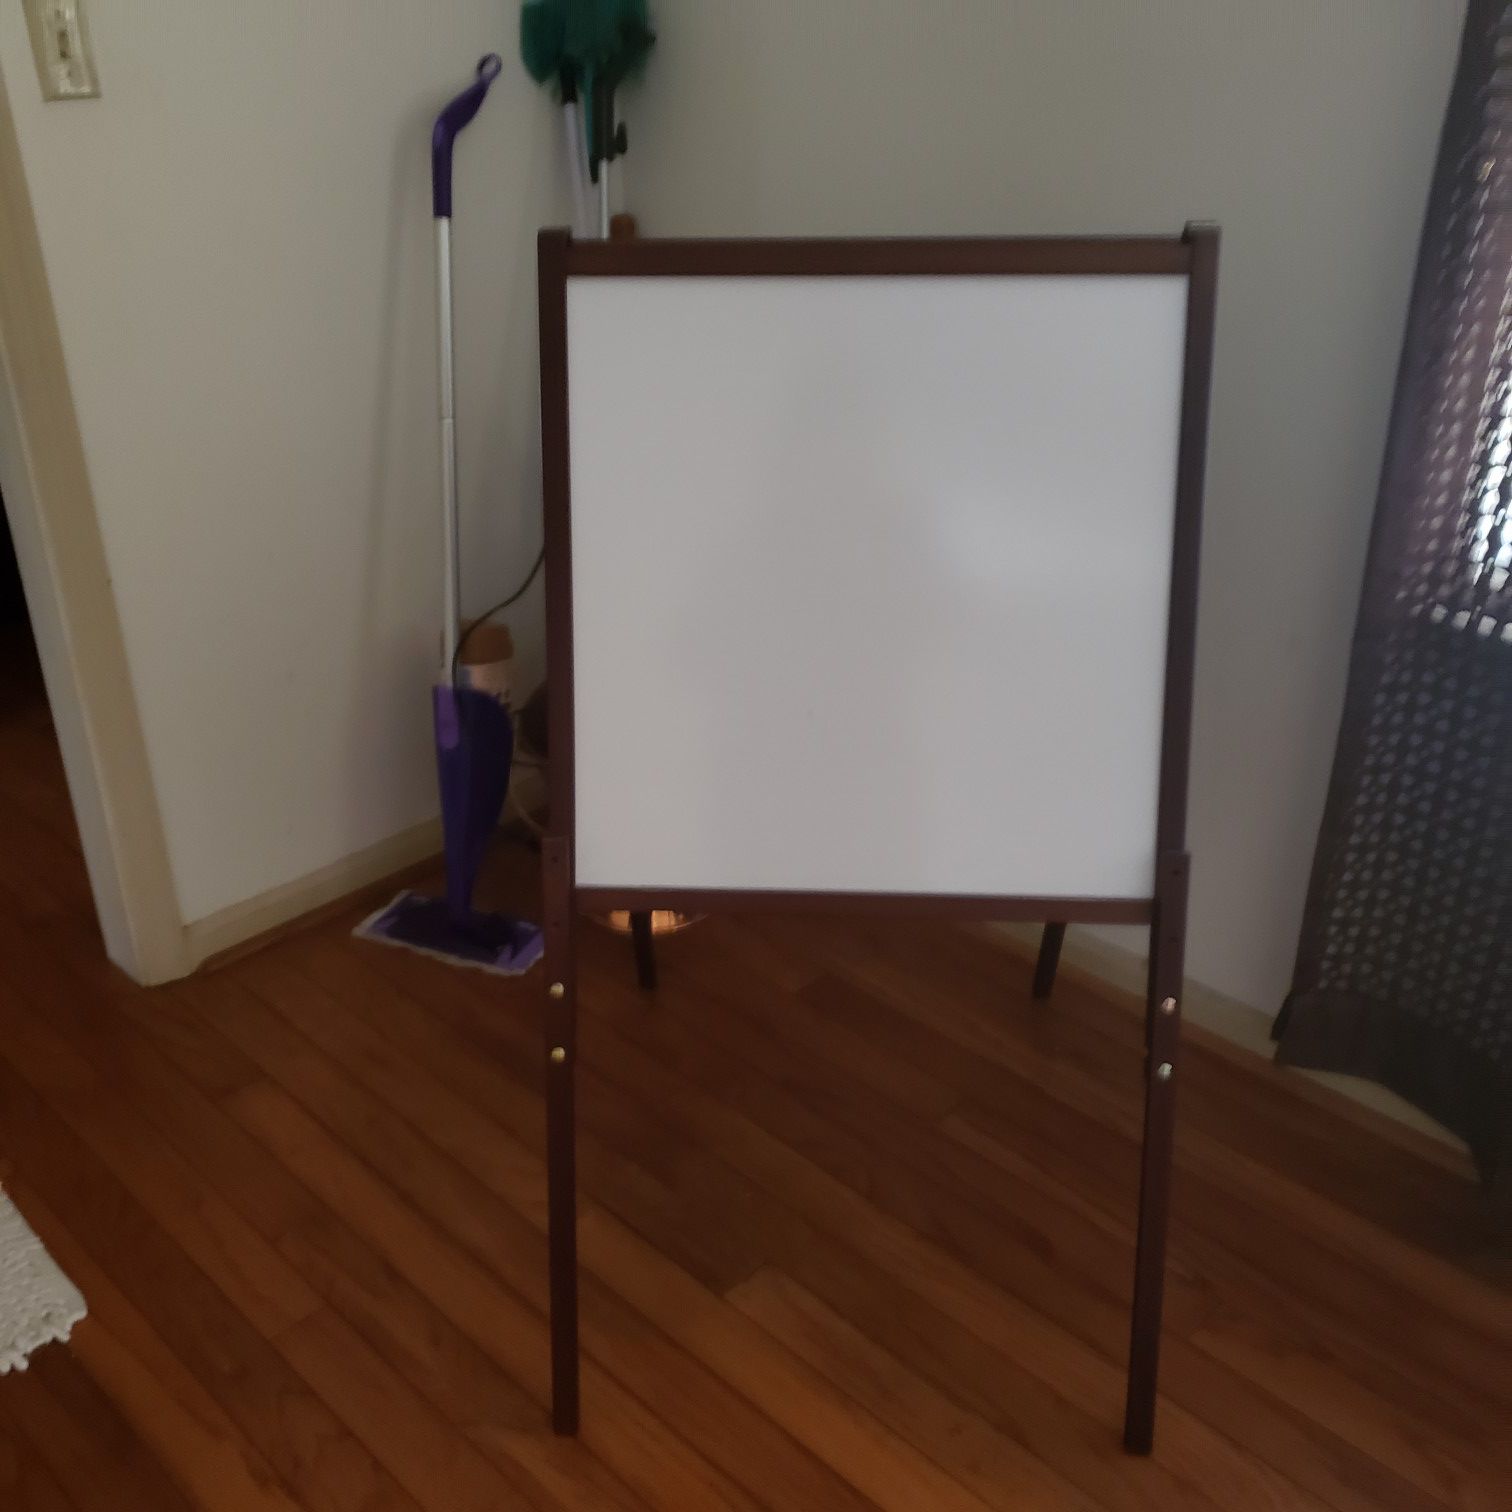 Whiteboard and also chalkboard